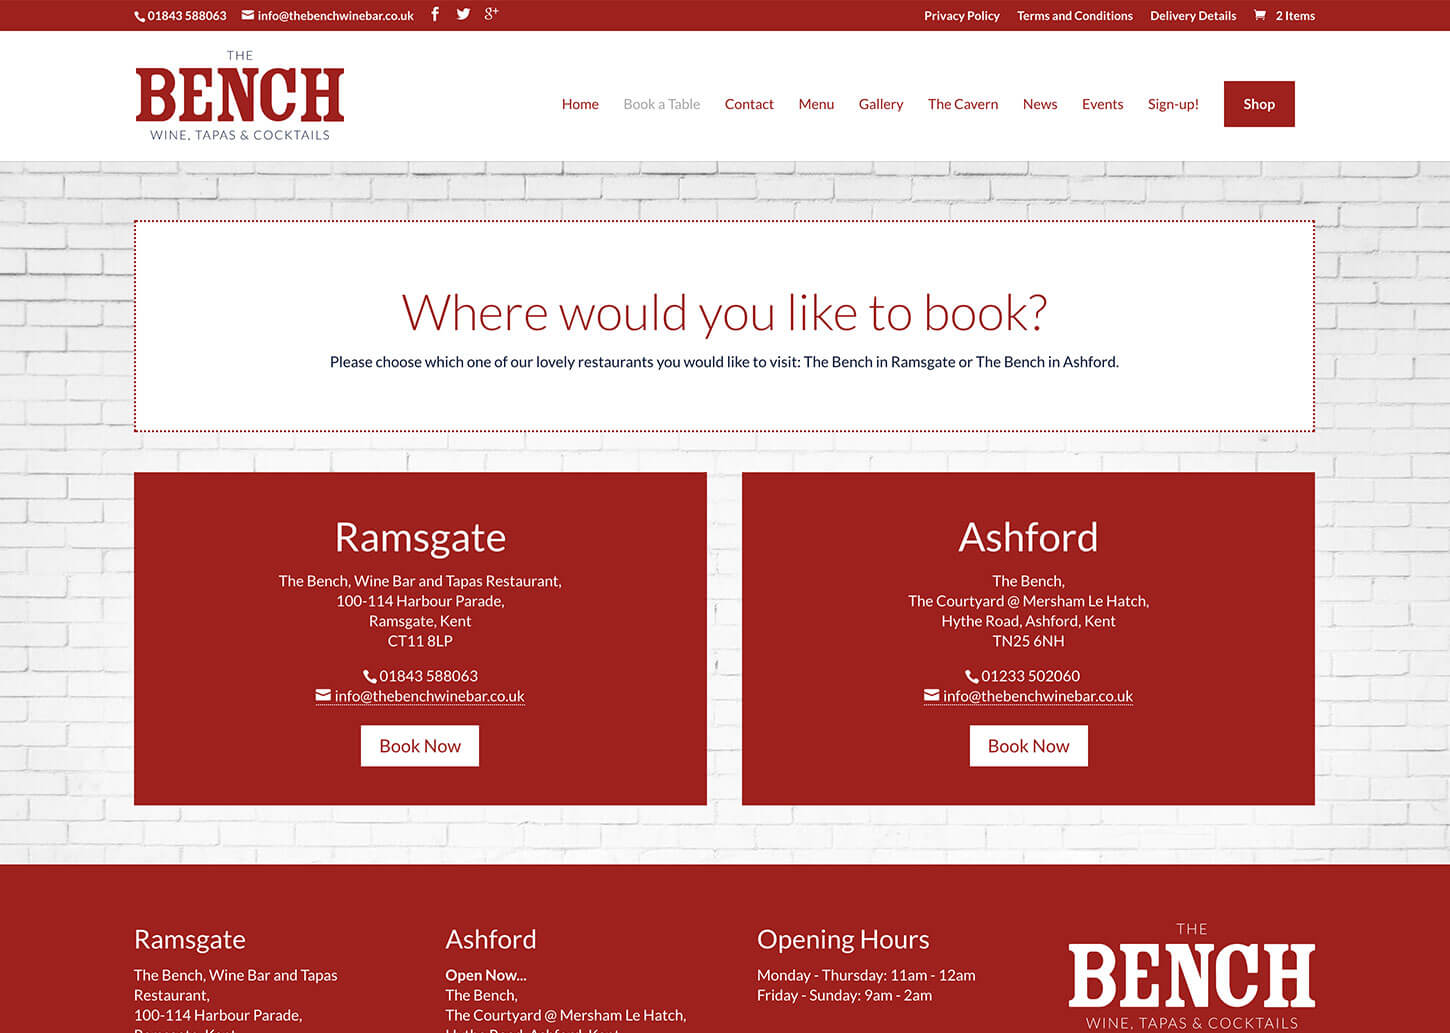 The Bench Restaurant website design - Booking page